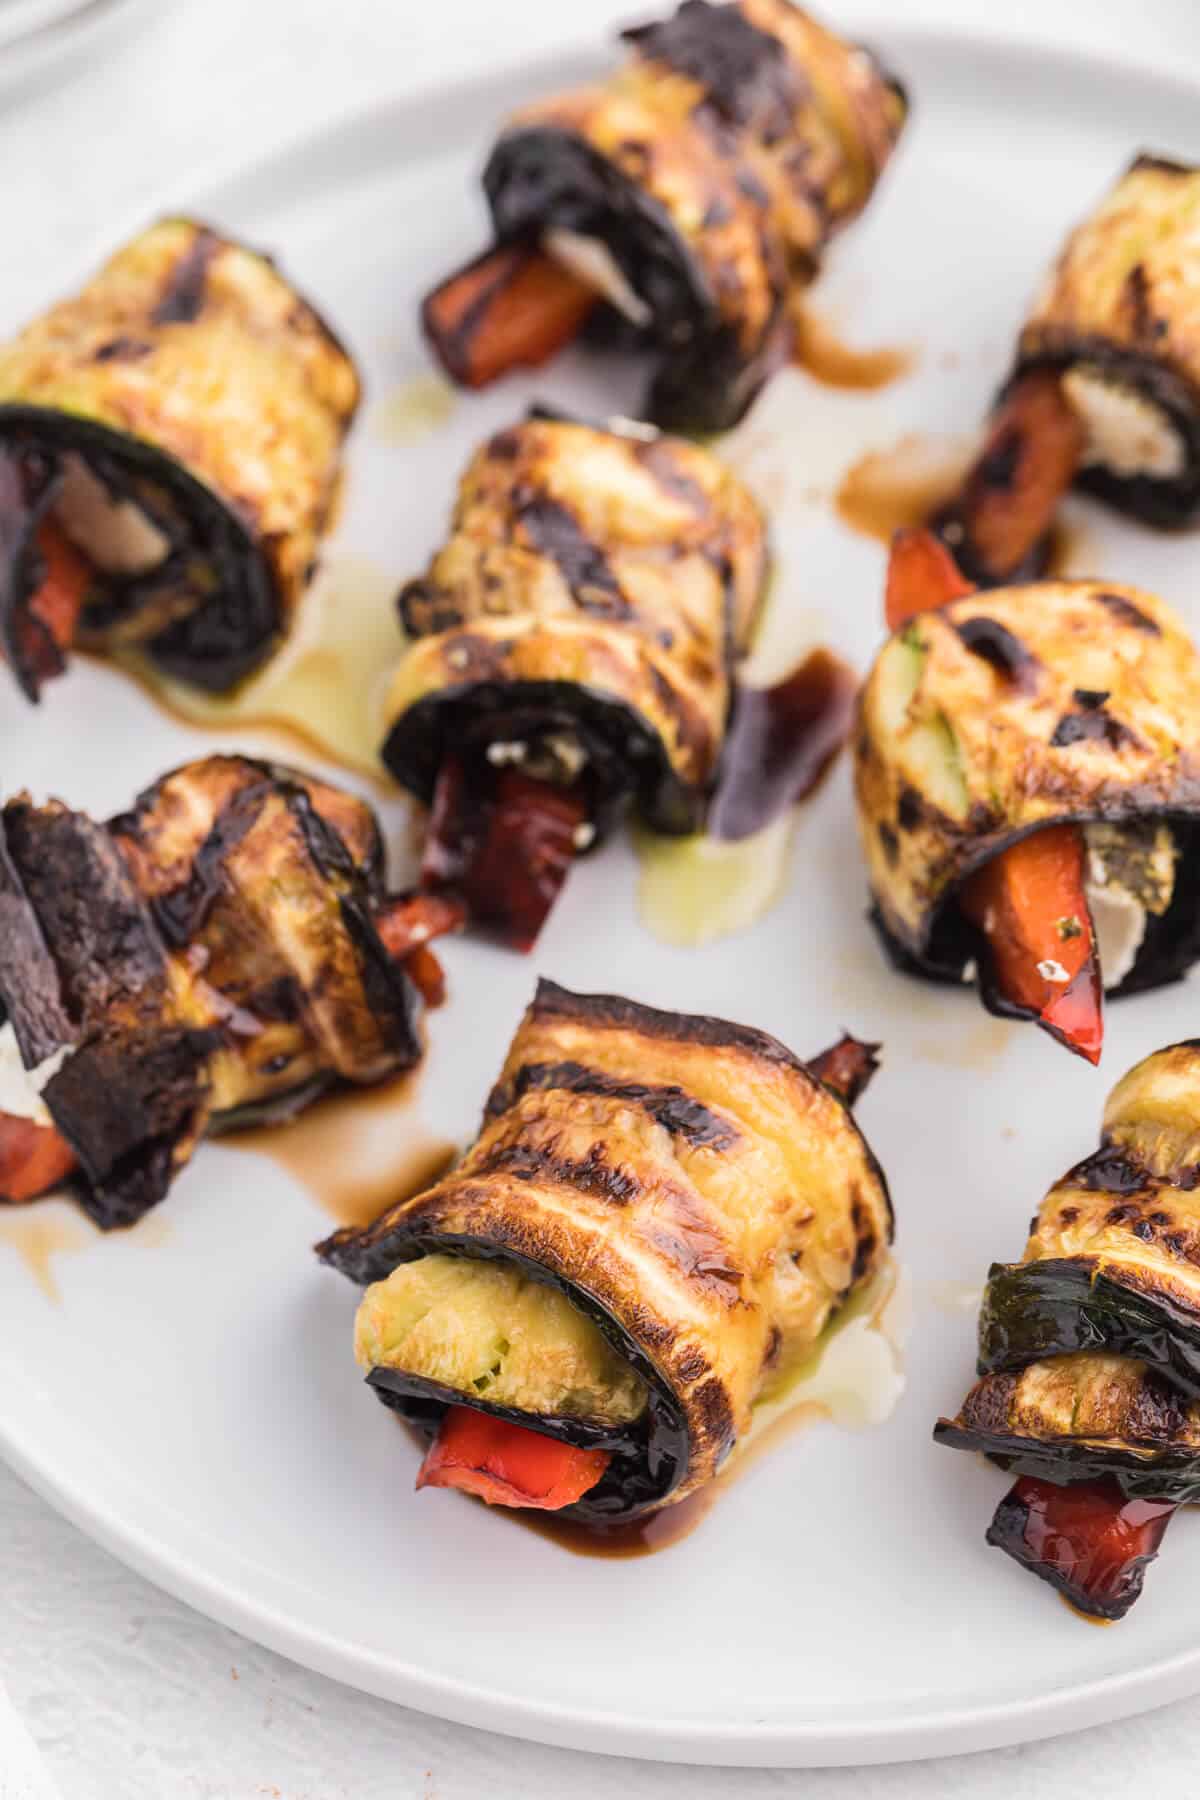 Grilled Zucchini Roll-Ups - A simple, but savory summer appetizer. This easy recipe wraps grilled zucchini strips around herbed goat cheese and grilled red peppers with a finish of extra olive oil and balsamic vinegar. Mmm!